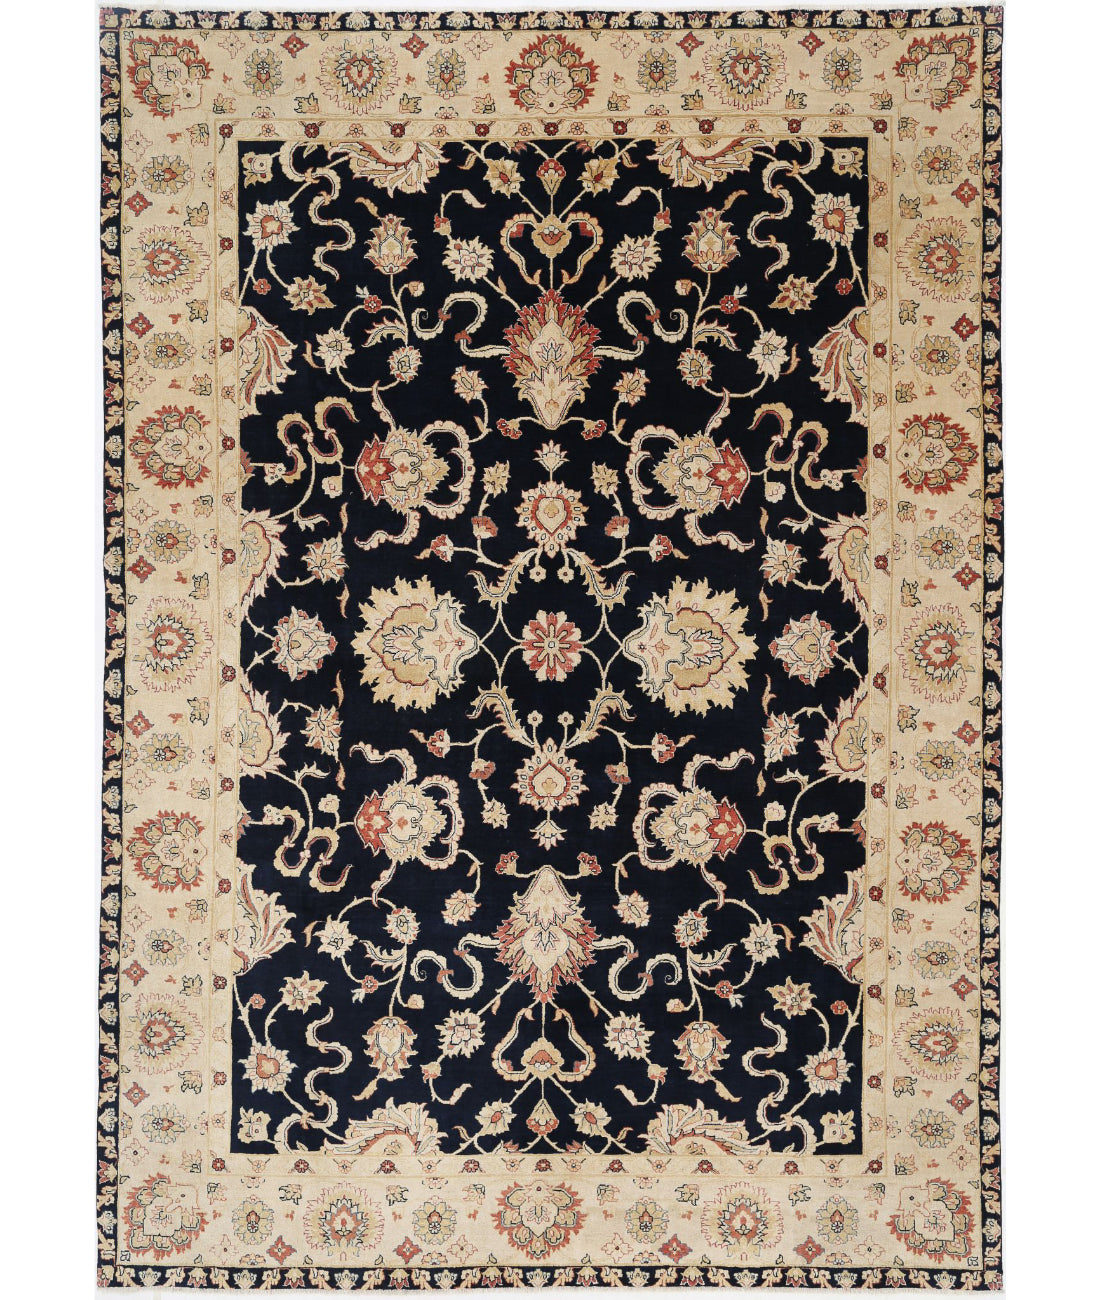 Ziegler 9'9'' X 13'10'' Hand-Knotted Wool Rug 9'9'' x 13'10'' (293 X 415) / Blue / Ivory